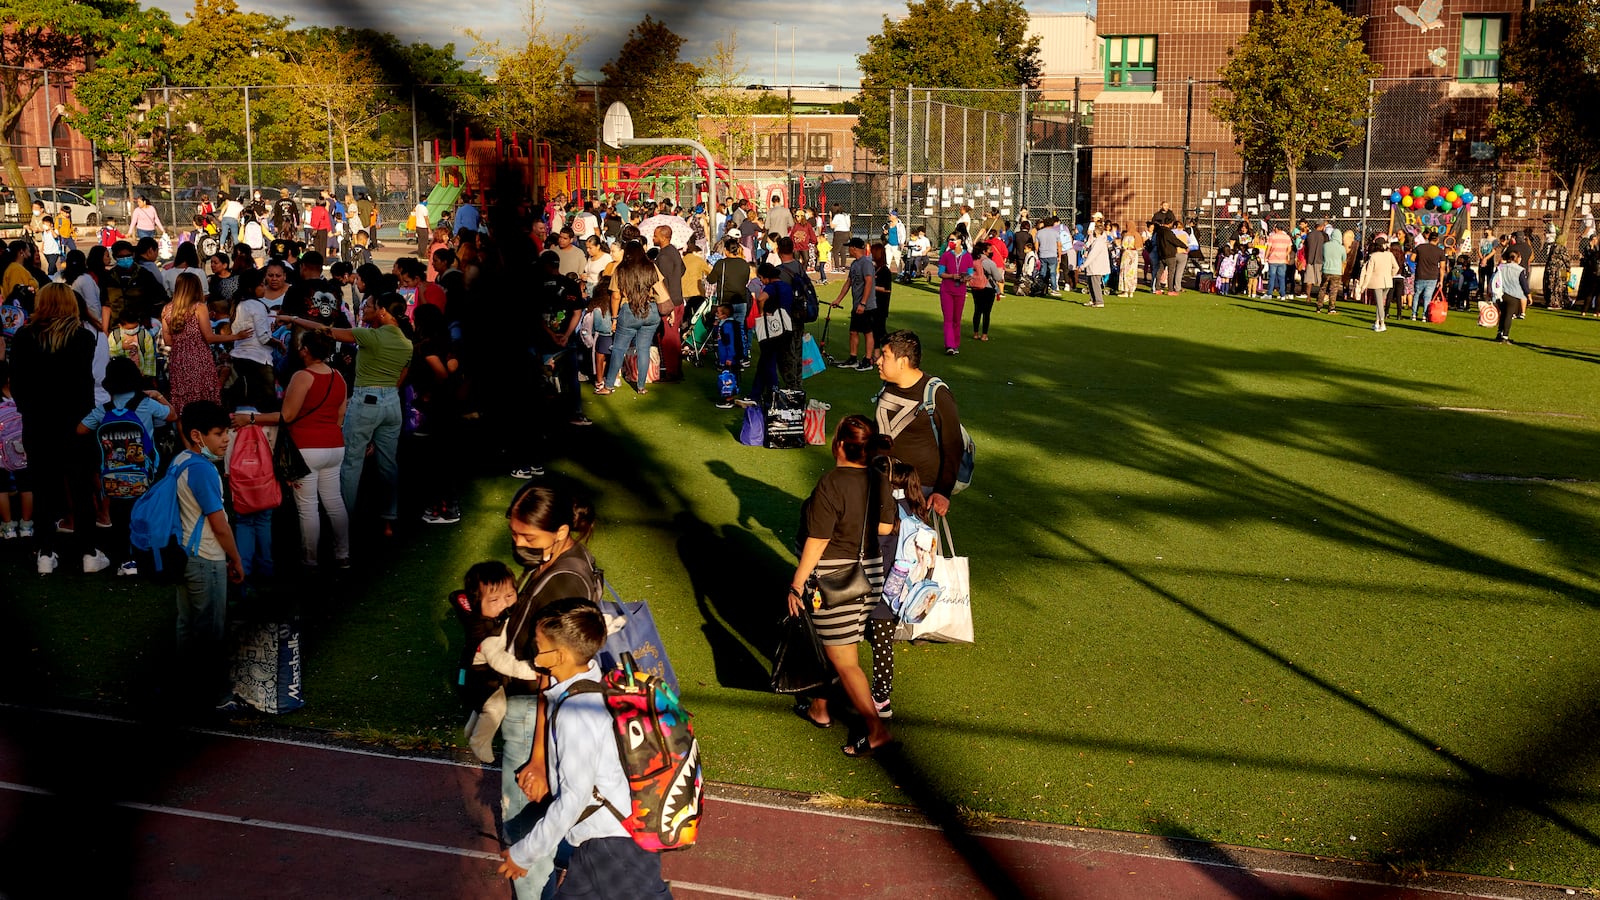 Students and parents are seen waiting on a field before sending their children to the first day of school.